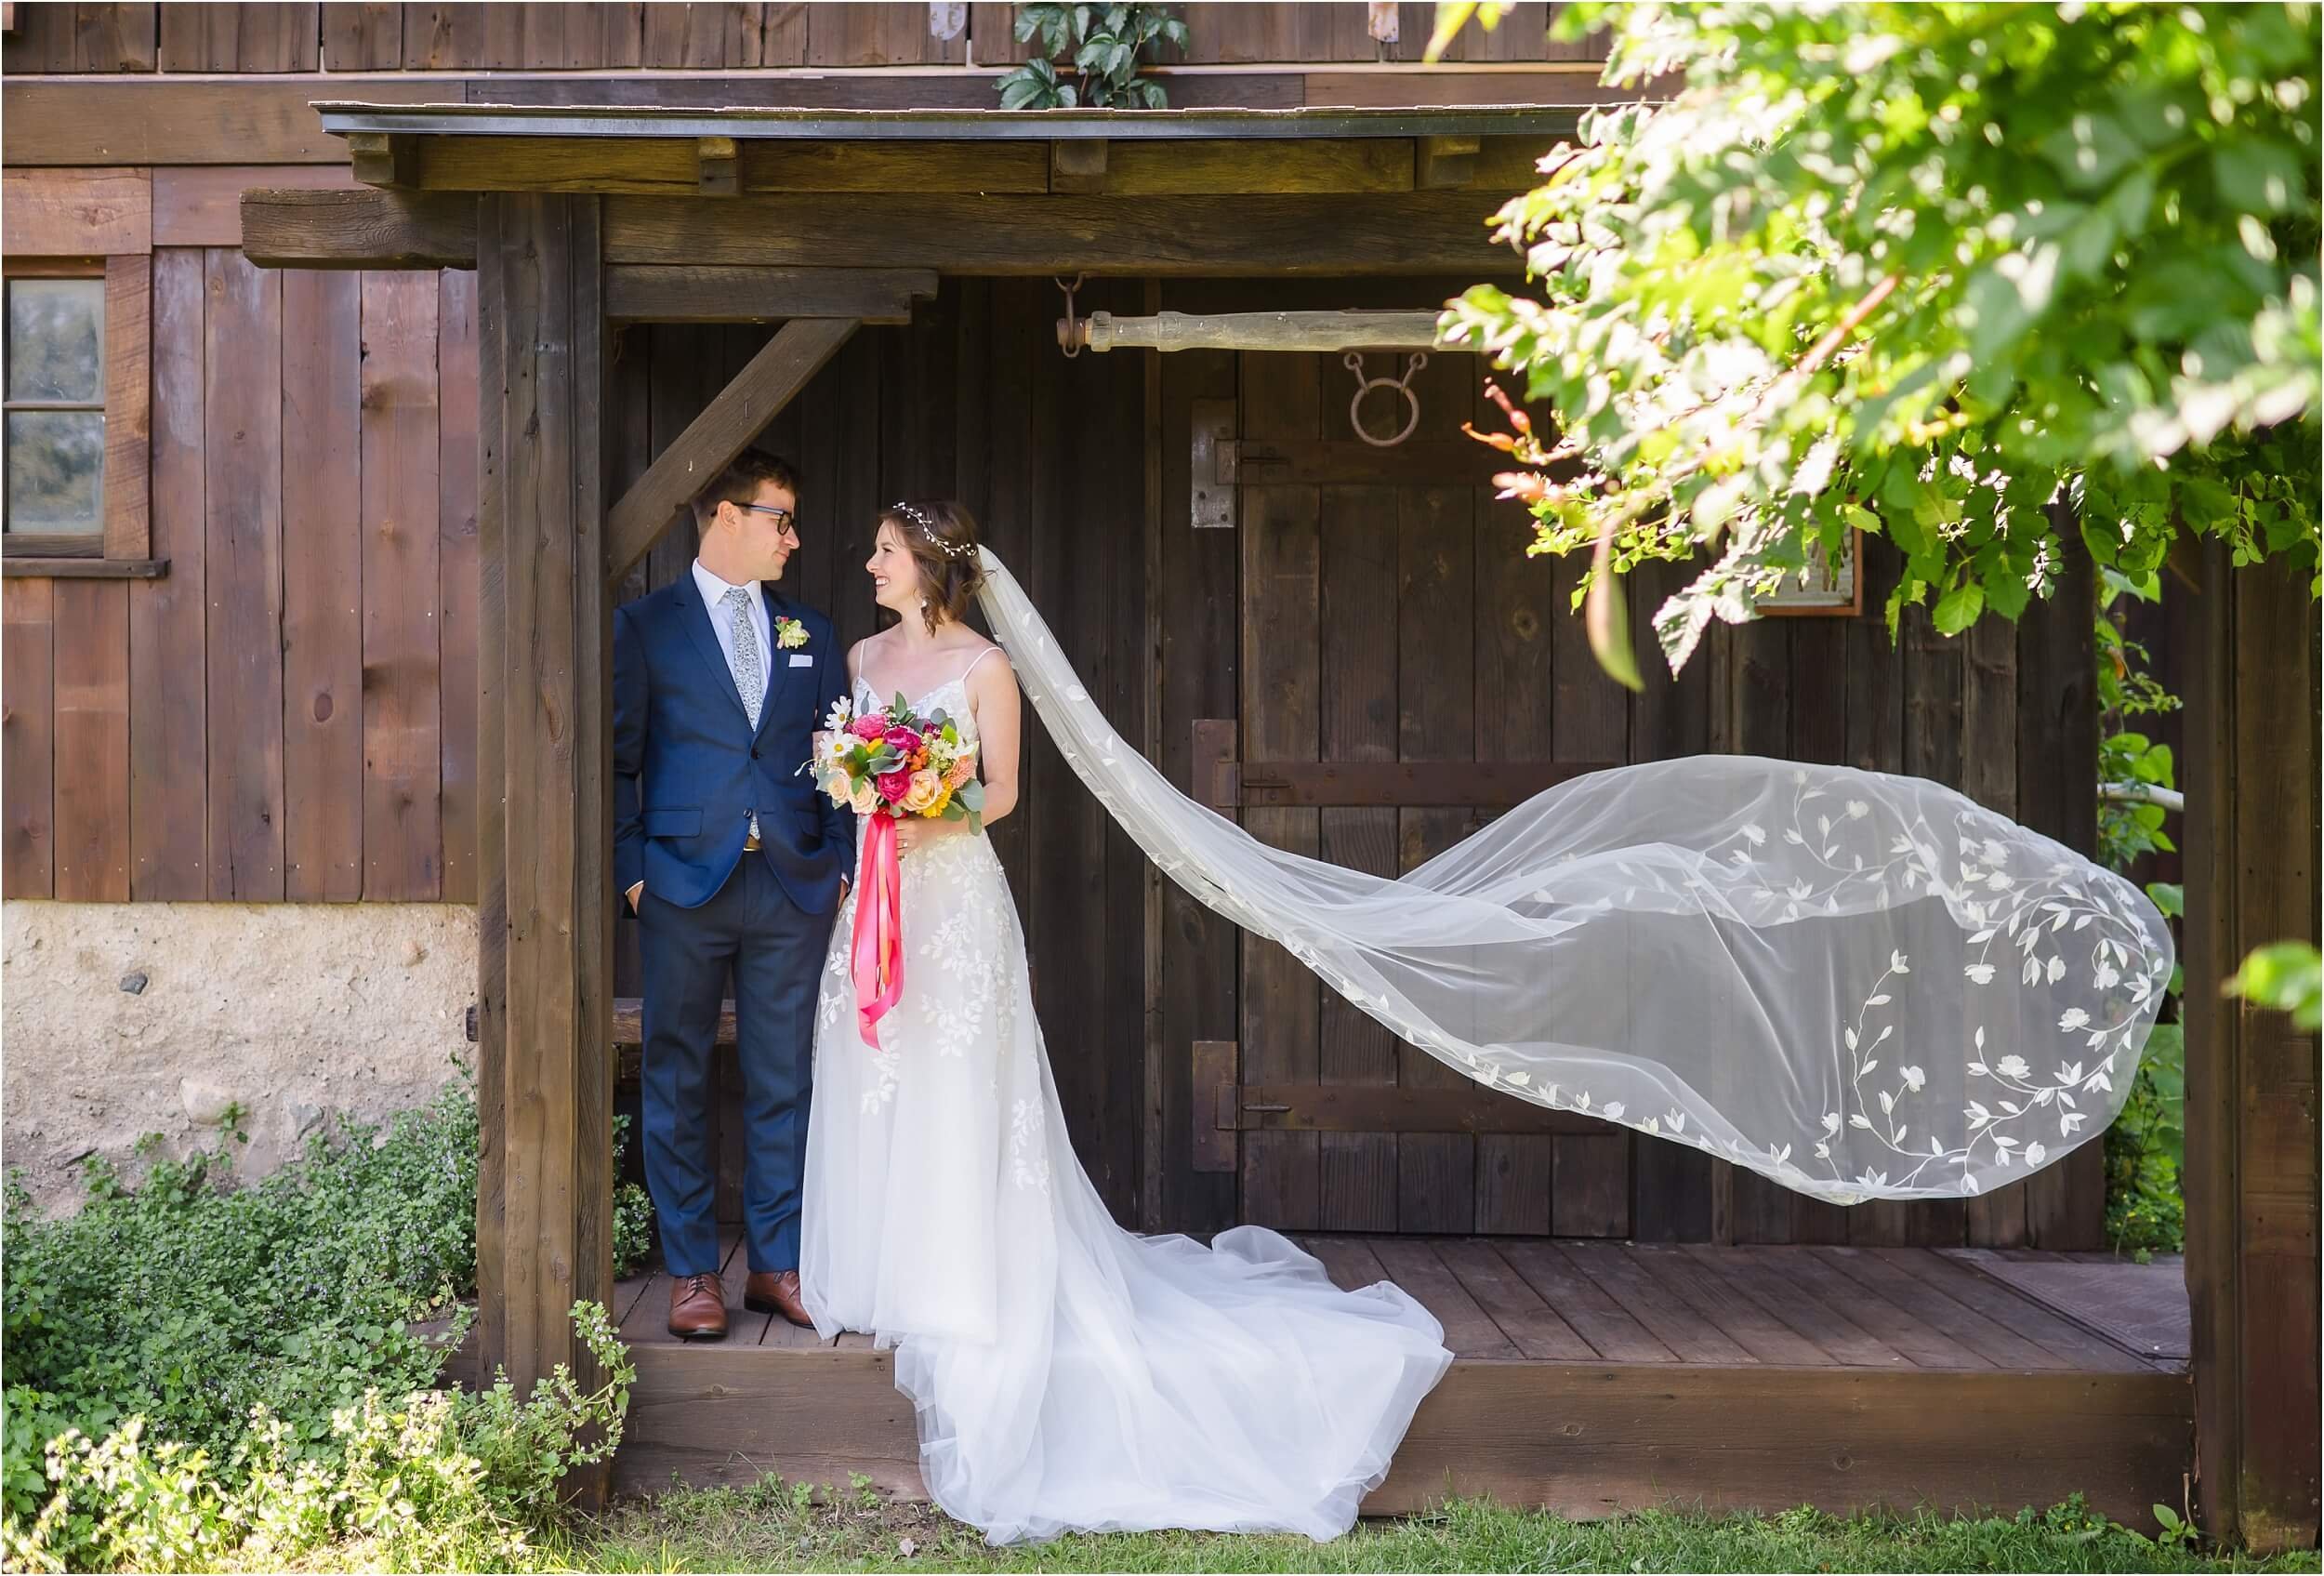  A gust of wind picks up a brides floral embroidered veil while she and her partner talk.  